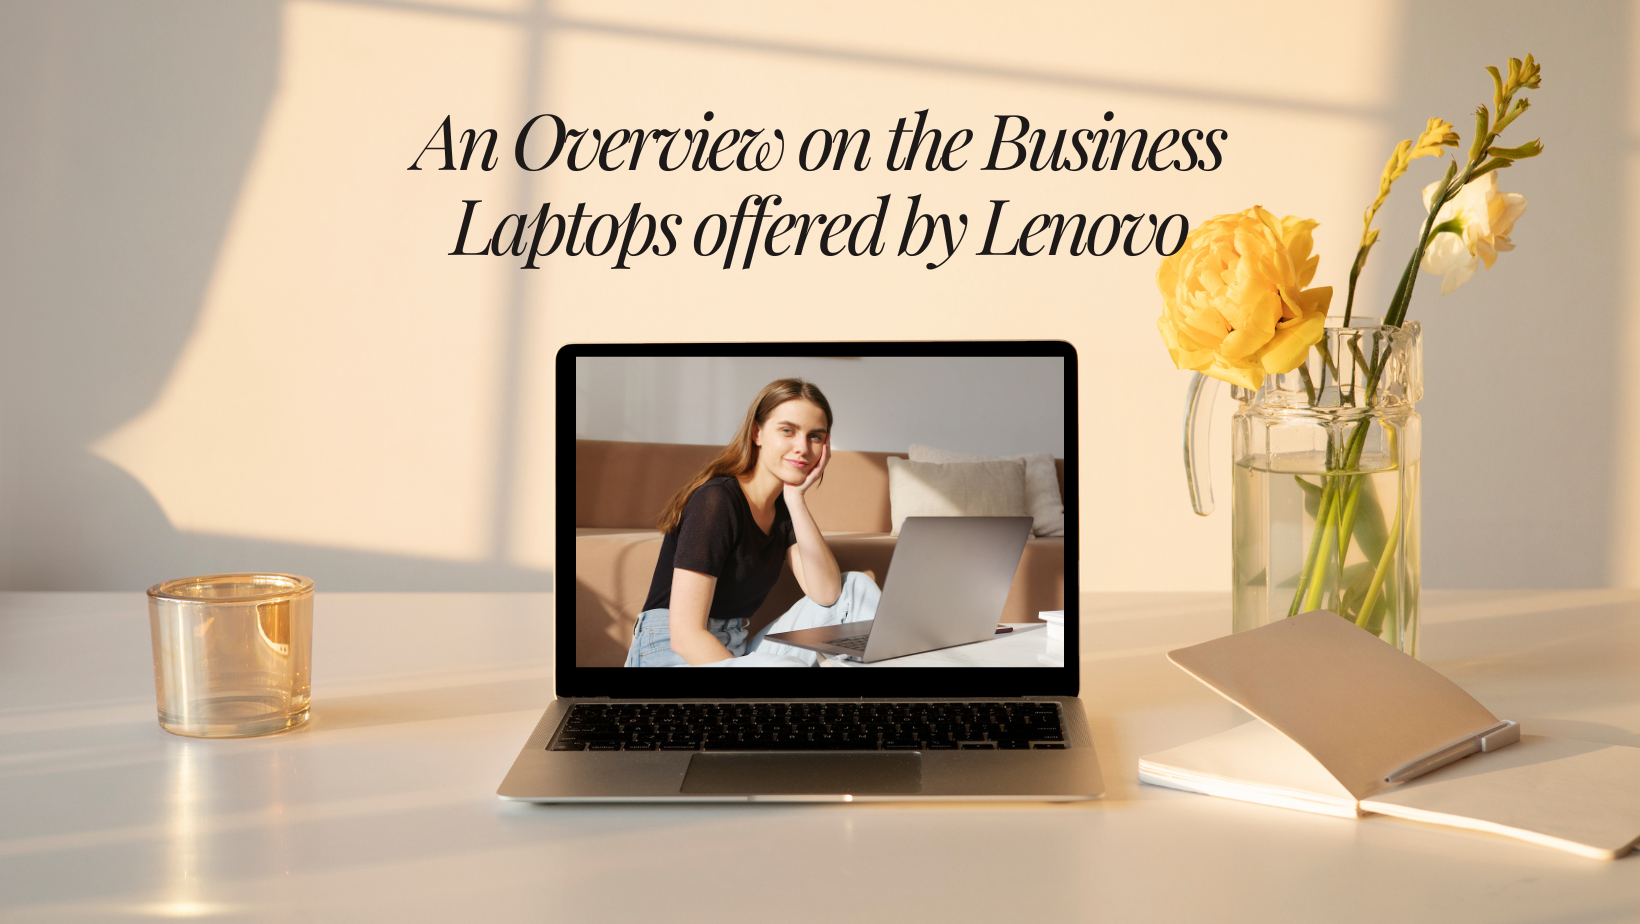 An Overview of the Business Laptops offered by Lenovo